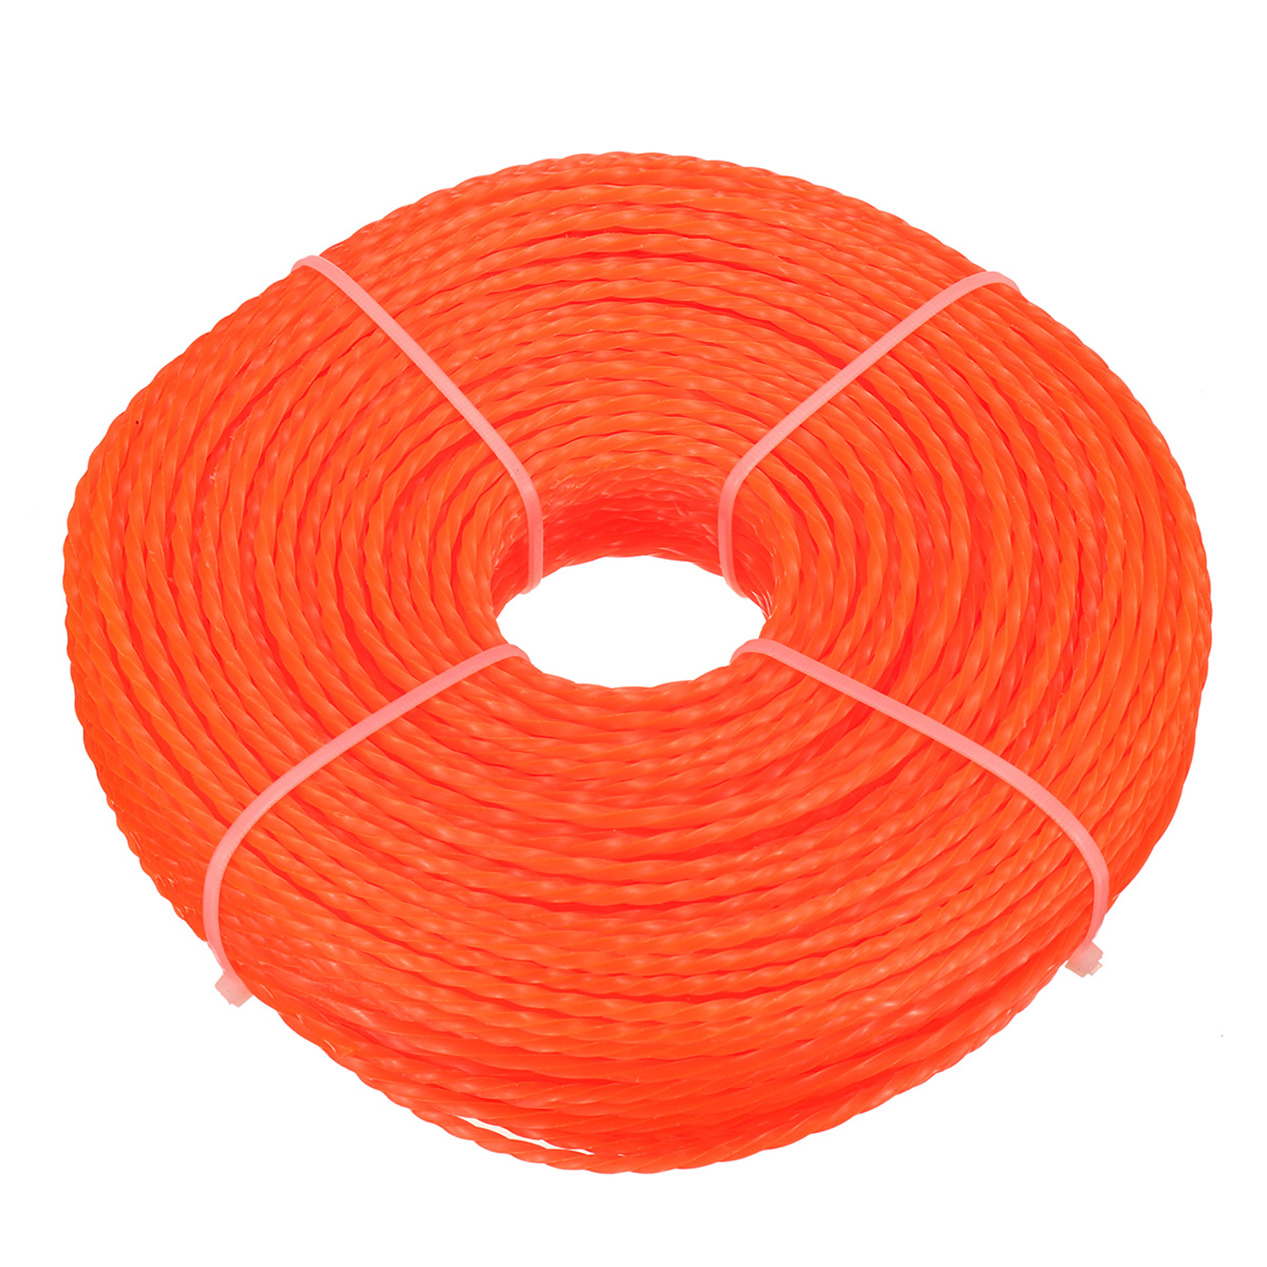 242730-mm-Commercial-Spiral-Twist-Trimmer-Line-Whipper-Snipper-Cord-1790010-7